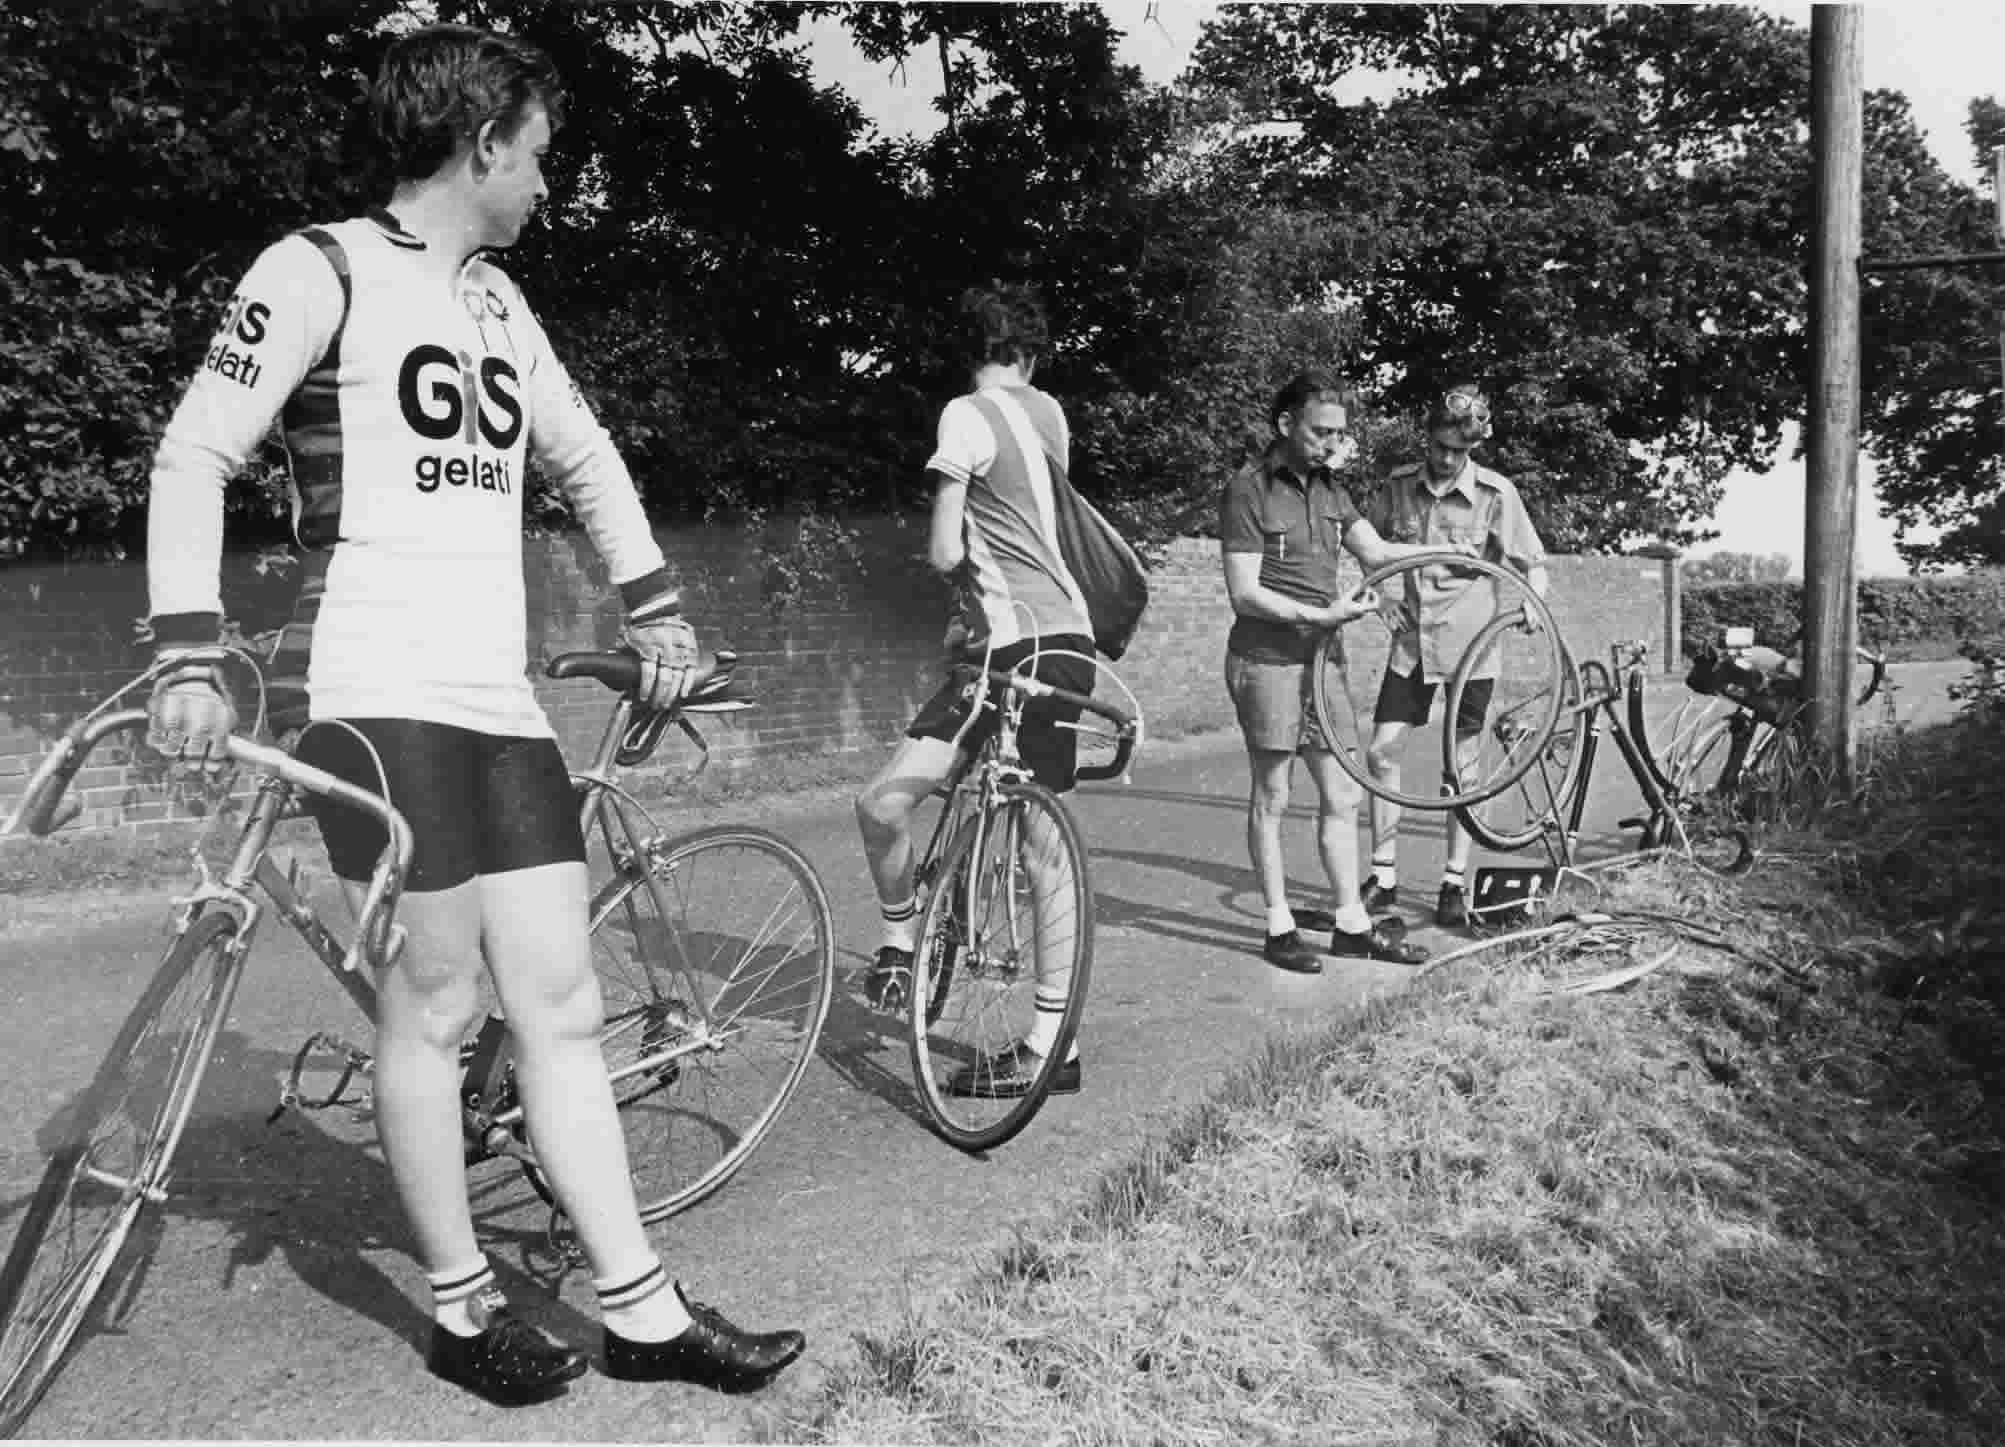 Some things never change - punctures still happen just as they did when this picture was taken in 1979. Roy and Peter Harris are still riding and no doubt still getting punctures